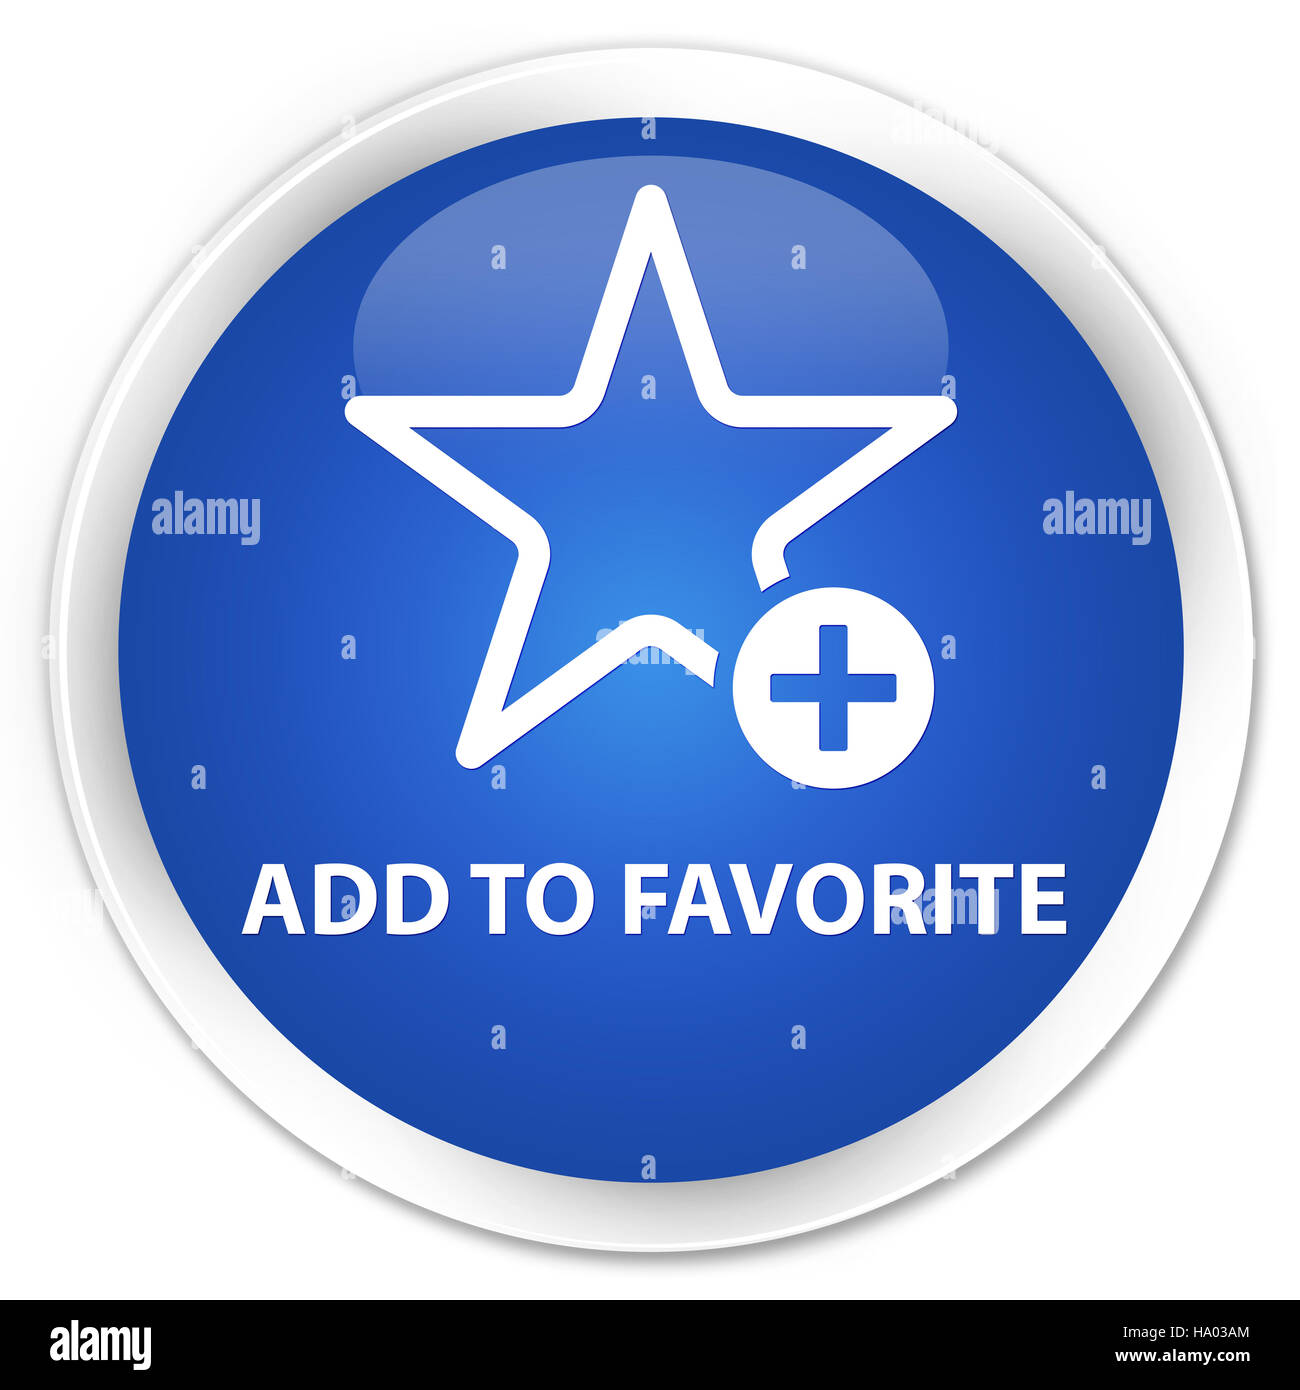 Add to favorite isolated on premium blue round button abstract illustration Stock Photo